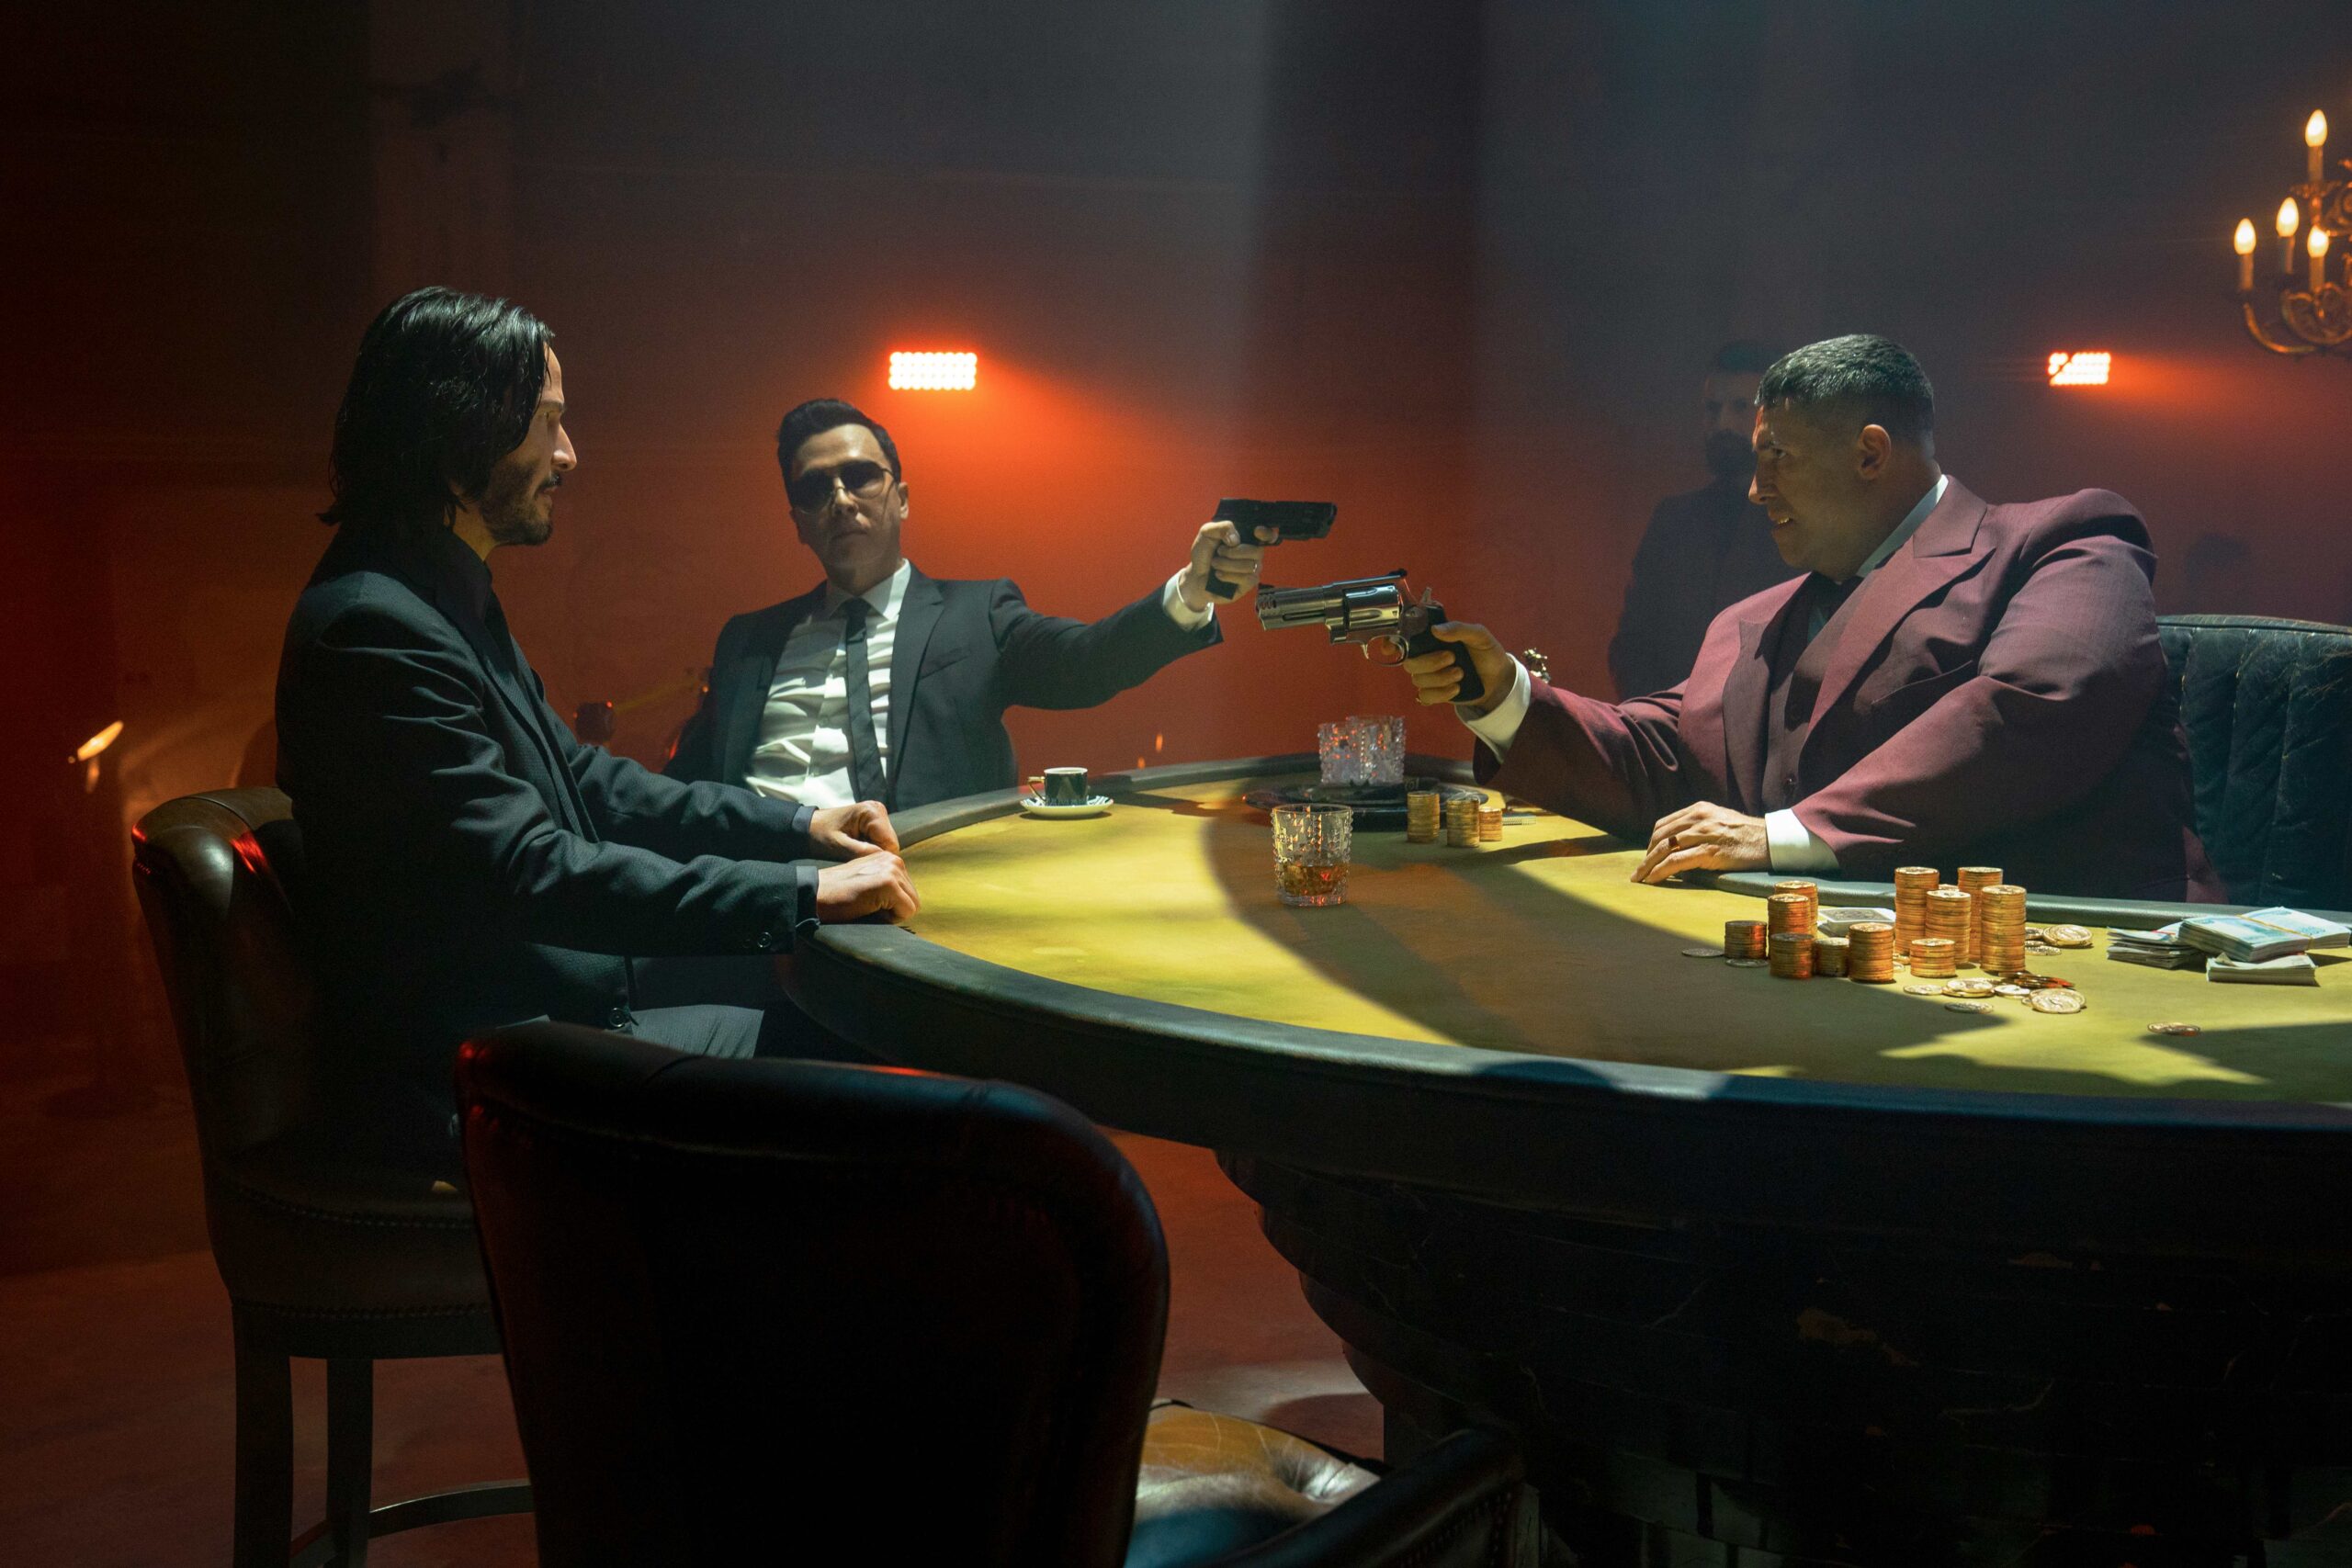 Keanu Reeves as John Wick, Donnie Yen as Caine, and Scott Adkins as Killa in John Wick: Chapter 4